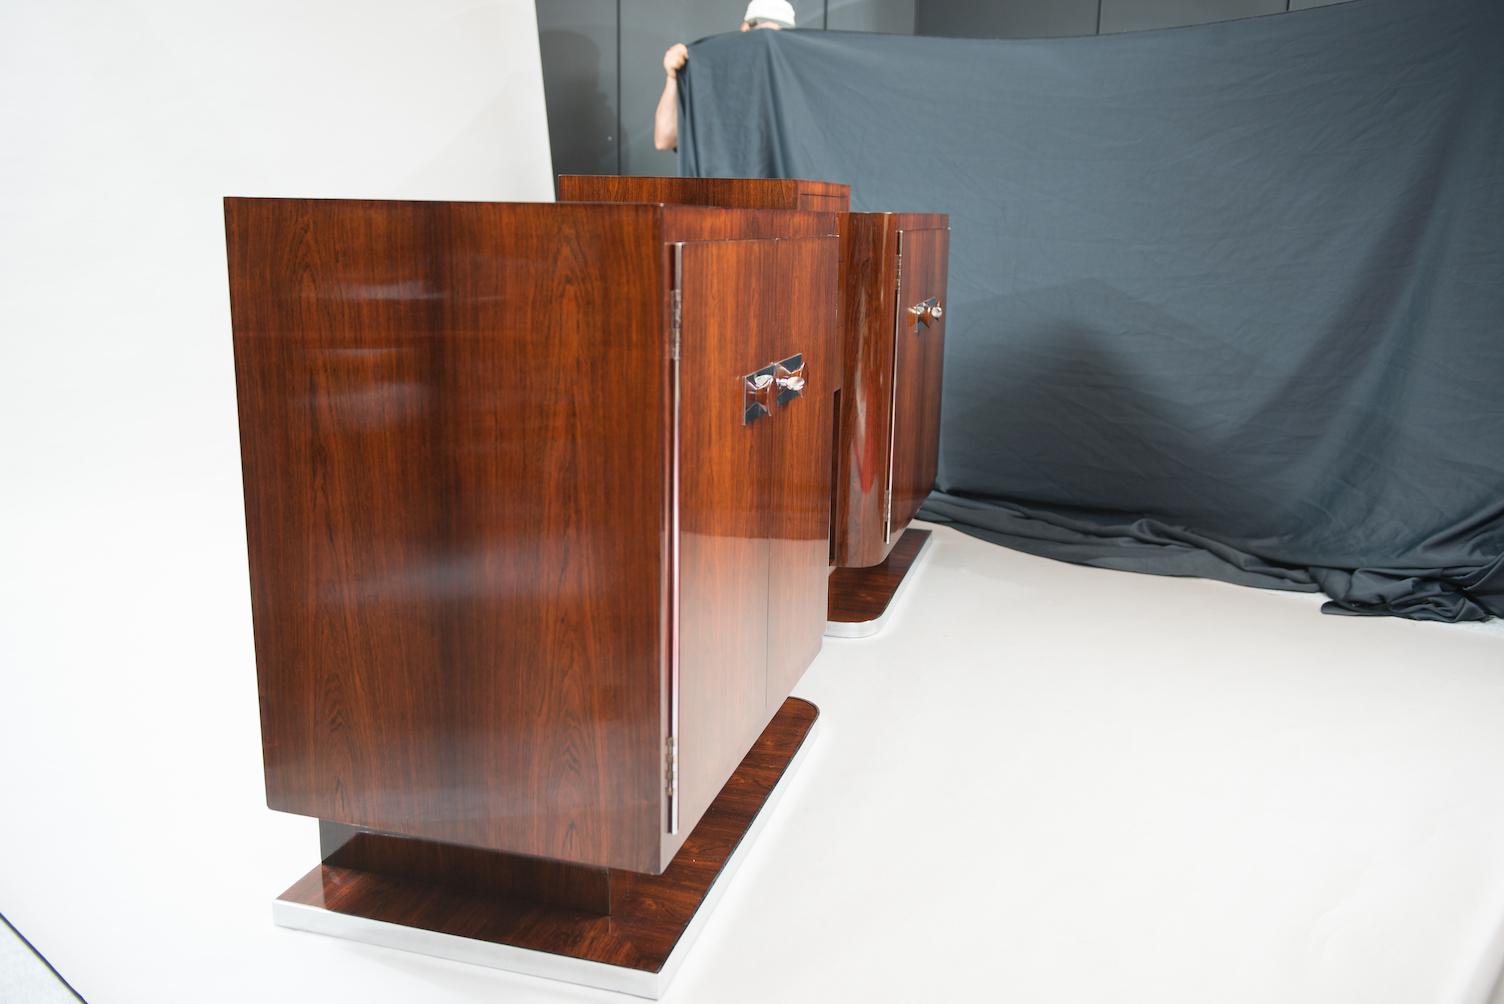 Rosewood Art Deco sideboard, with a chrome frame in the base and chrome plates on the doors.